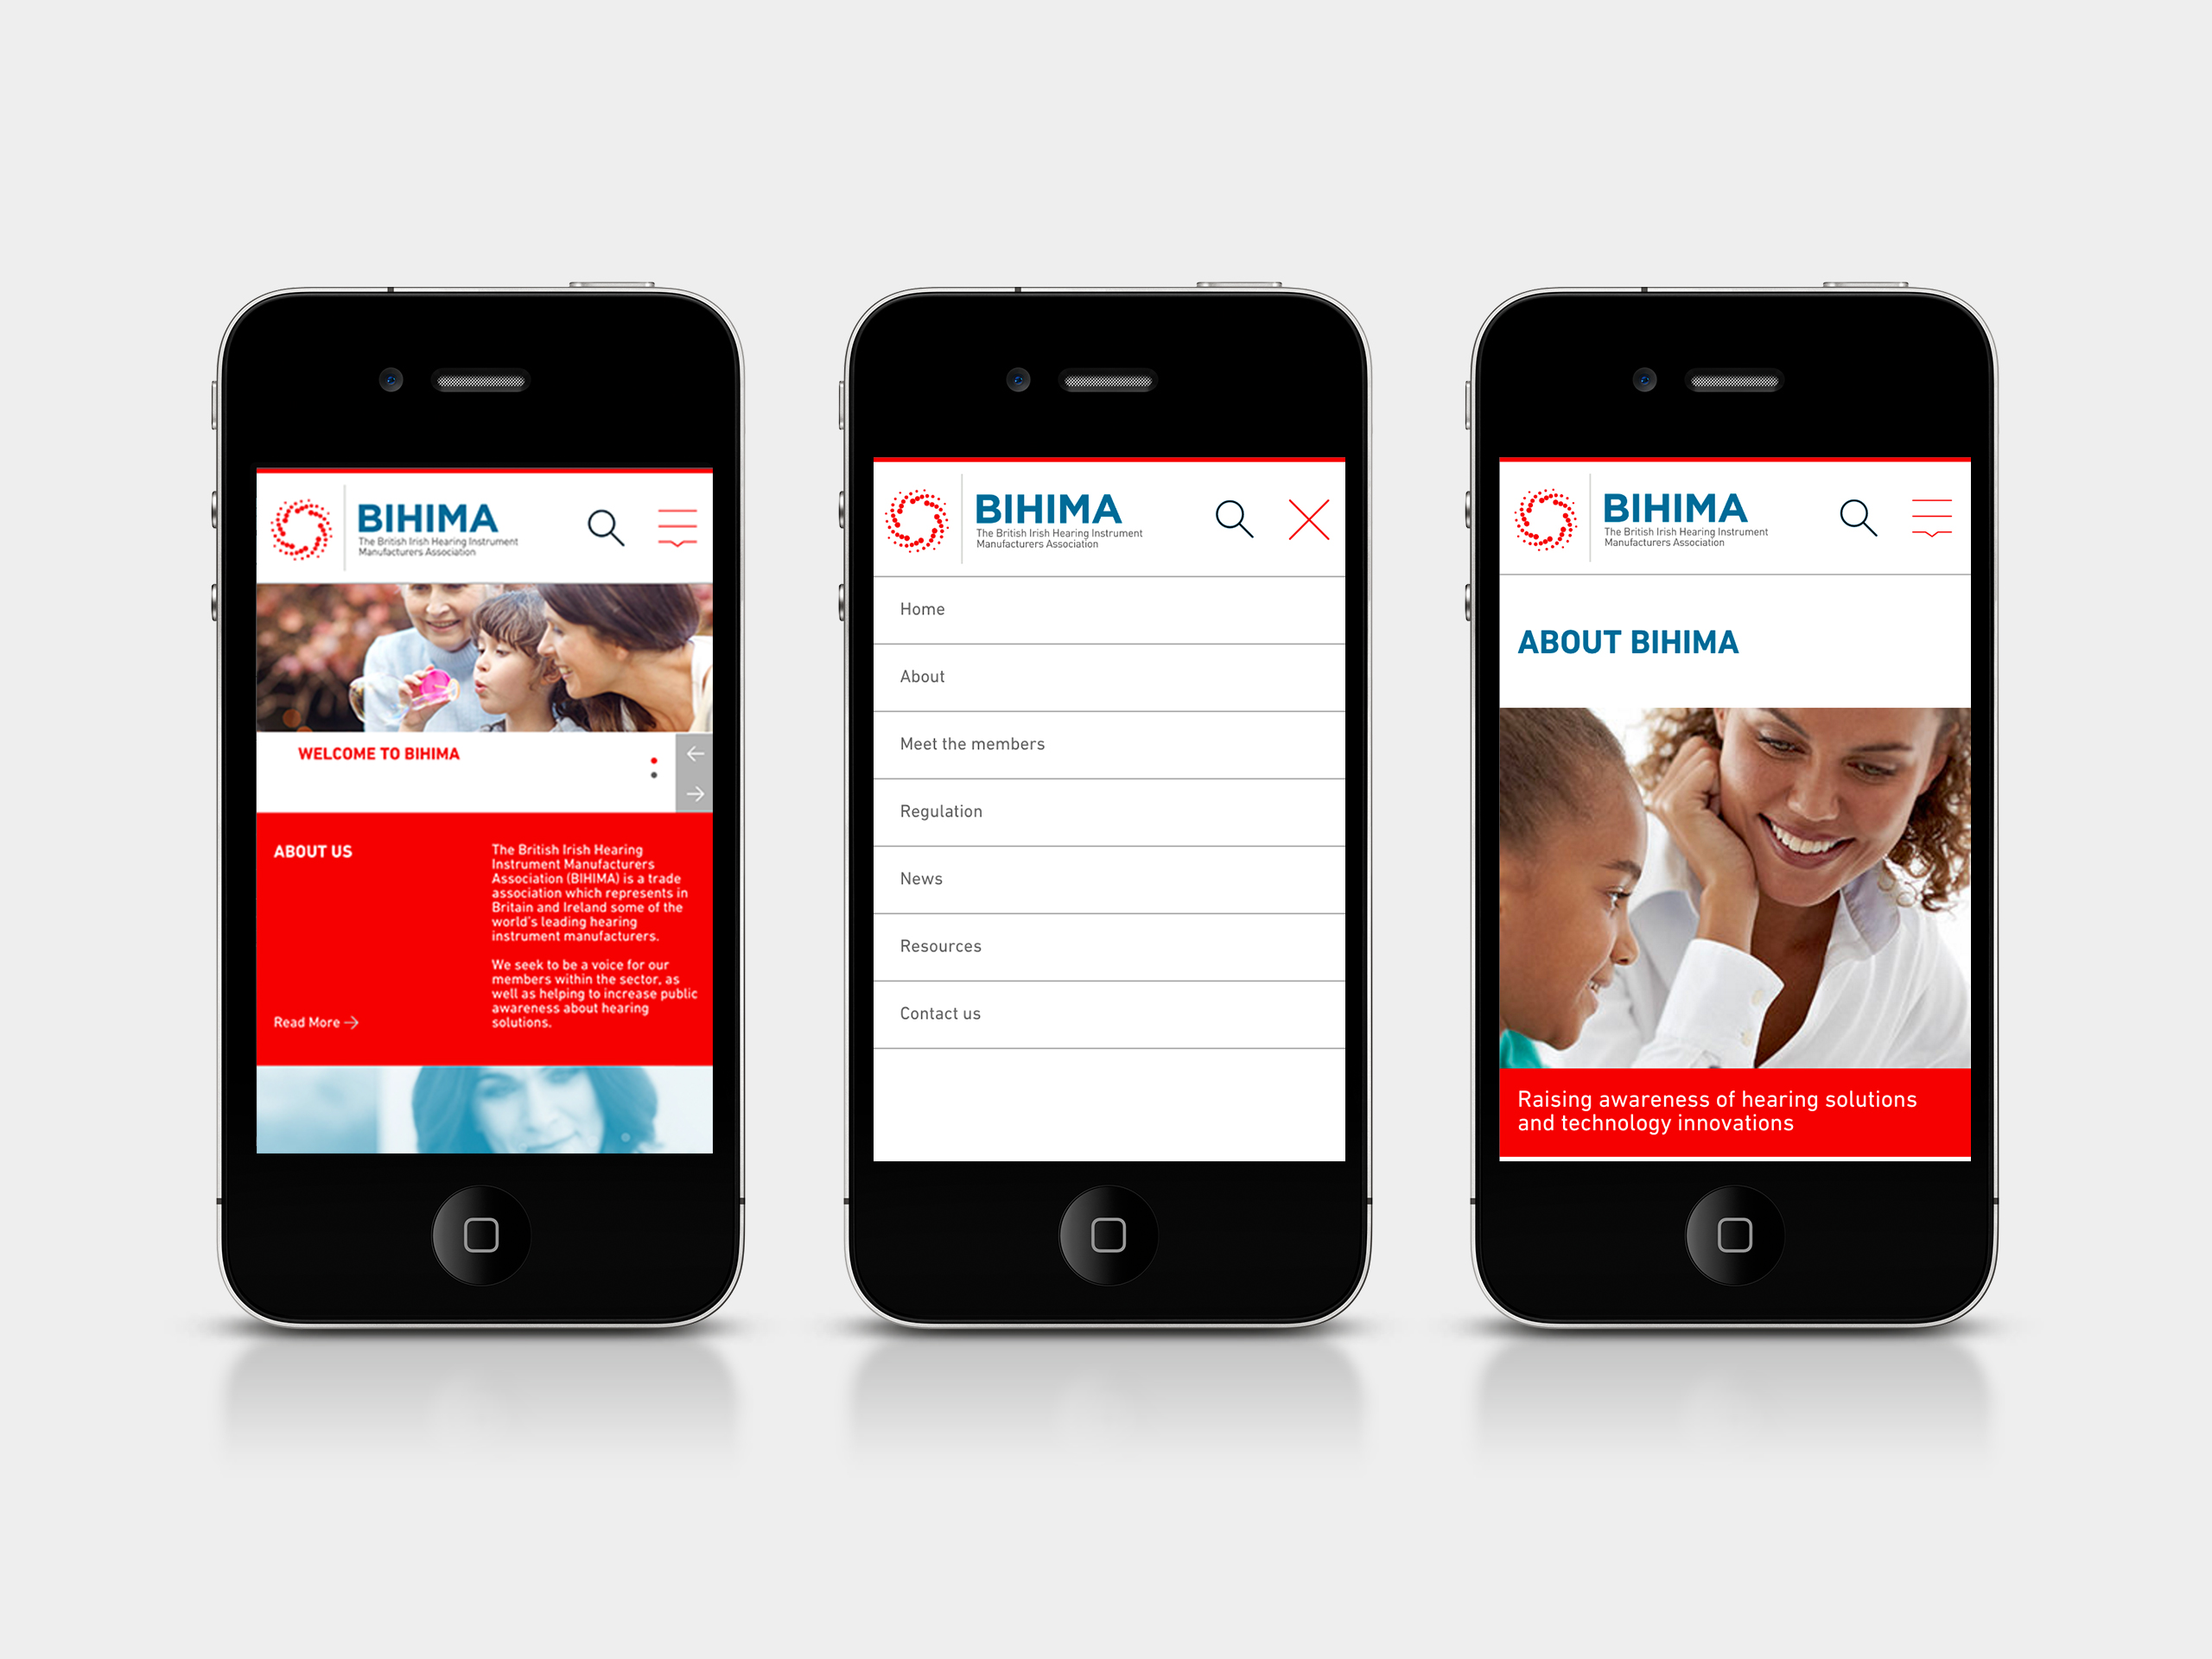 Three mobile phone screens each displaying a different website page from the new BIHIMA website design and build.